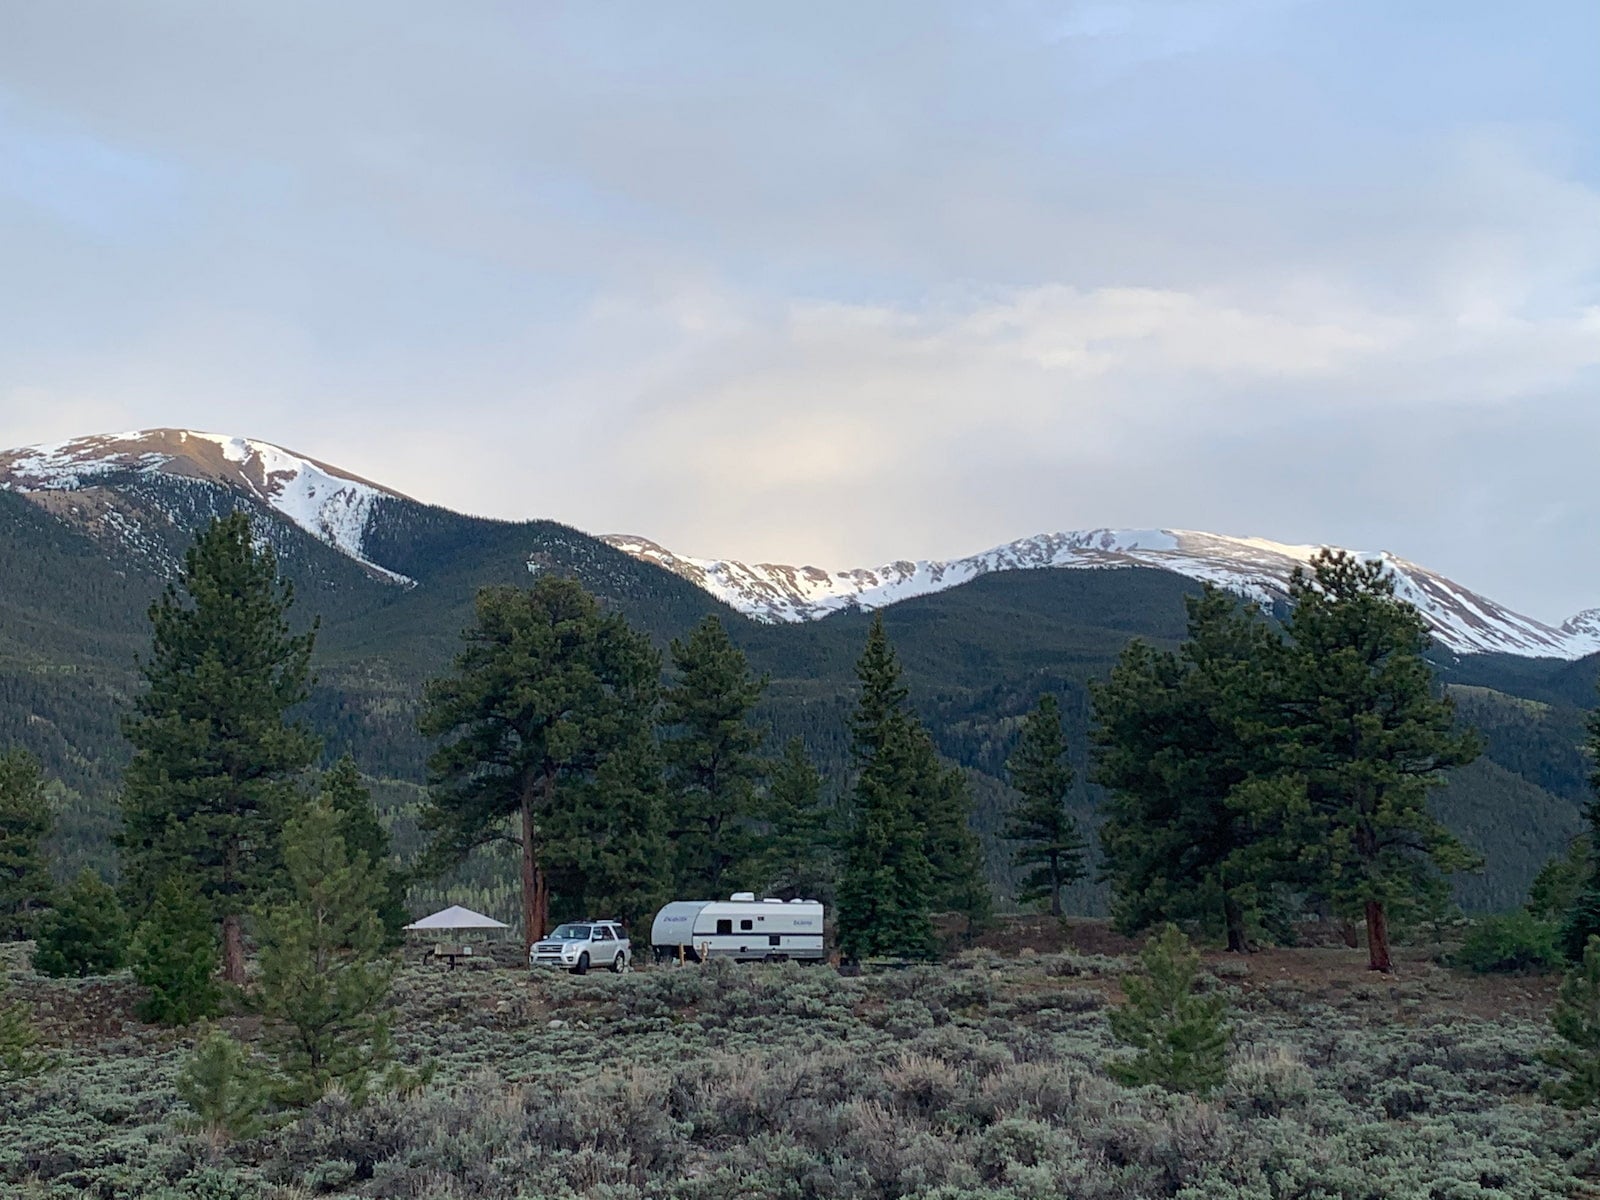 RV with Truck parked in campsite surrounded by pine trees below snow capped mountains.